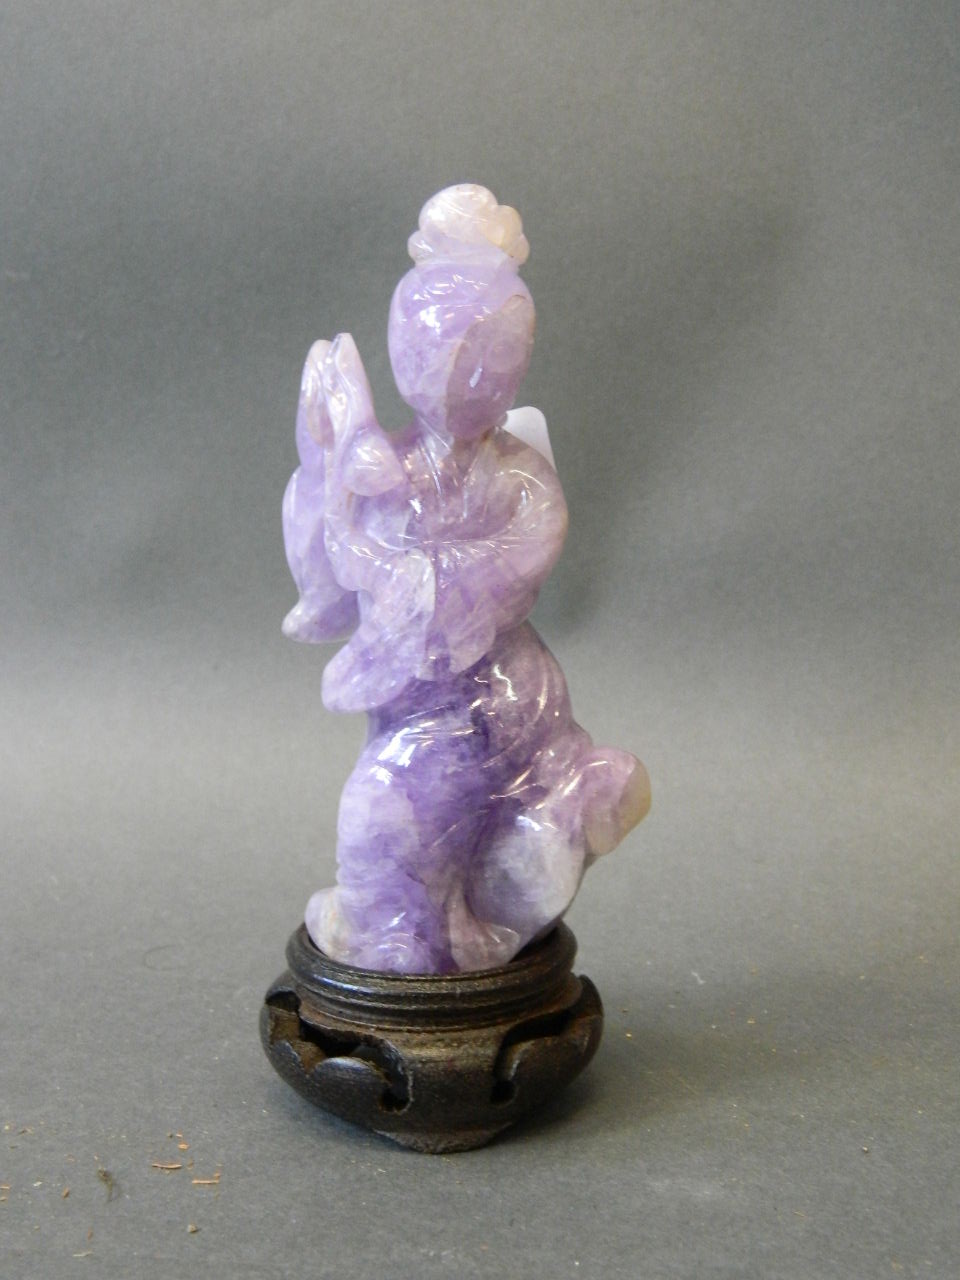 A fine early C20th mauve quartz figure of Guan Yin holding a lotus, on a later wood stand, figure